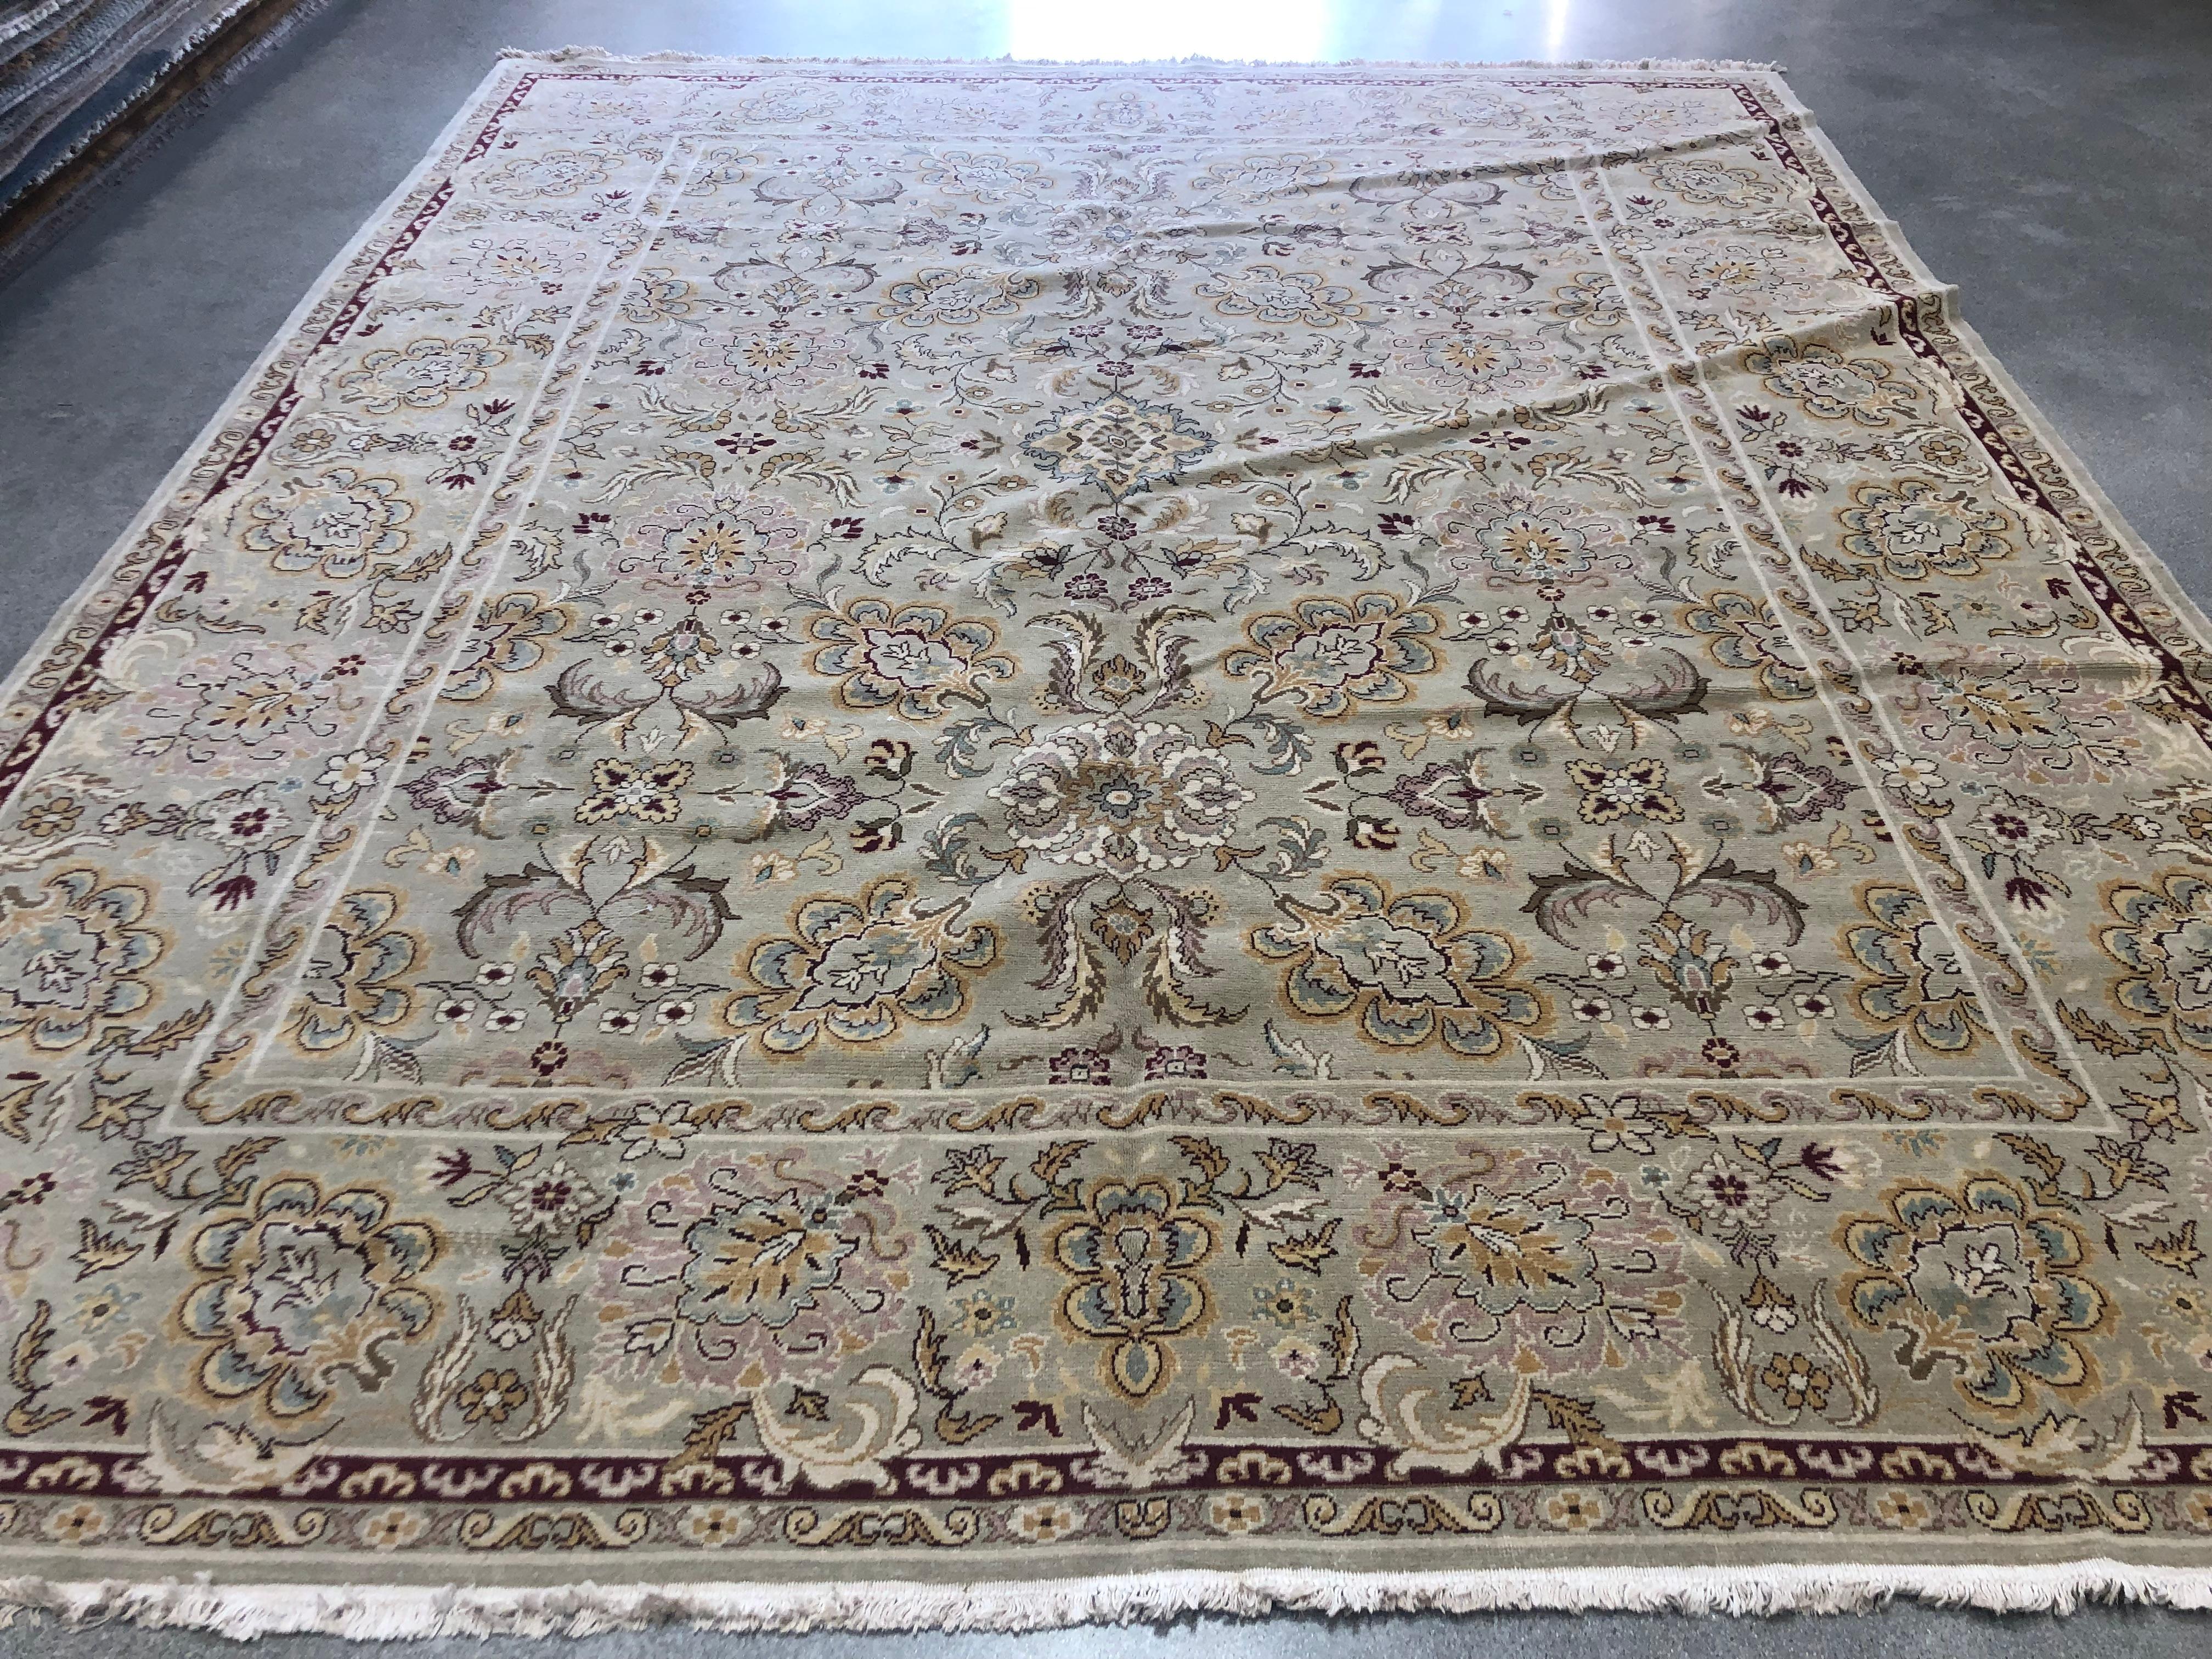 A beautiful bouquet of blue, yellow, pink, teal, red, green, cream and gold flowers bloom against a beige background in this Amritsar style floral rug. Hand knotted wool.